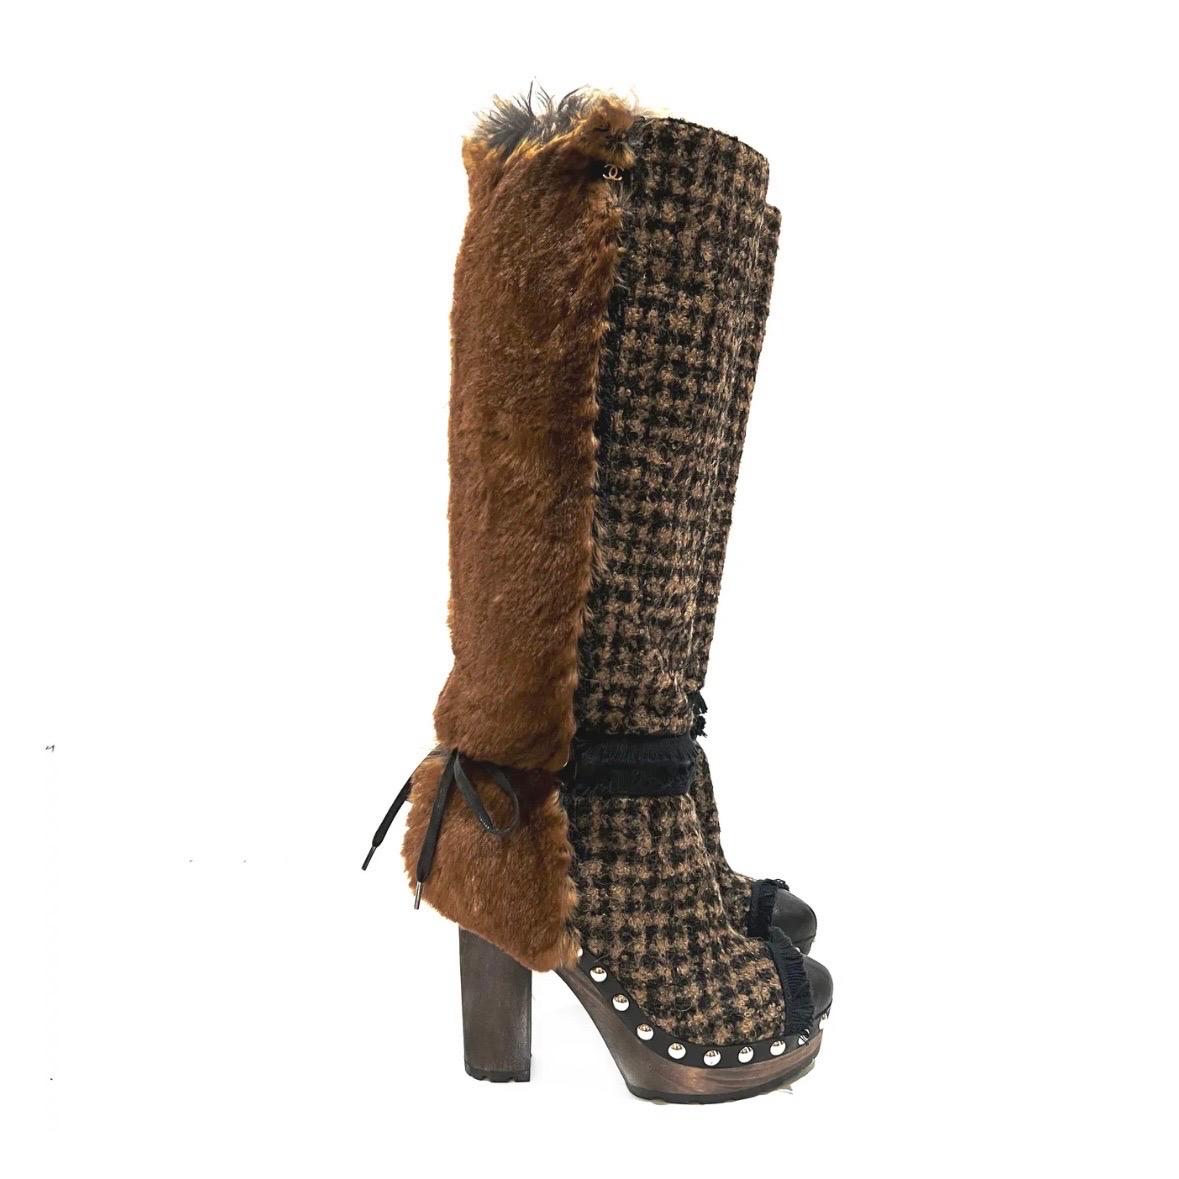 Houndstooth Fur Heel Boot by Chanel
Fall / Winter 2010 
Made in Italy 
Brown
Houndstooth tweed detail on front of boot
Rabbit fur on back of boot detail
Fringe detail near ankle and toe
Silver stud trim detail around foot
Dark wood platform and